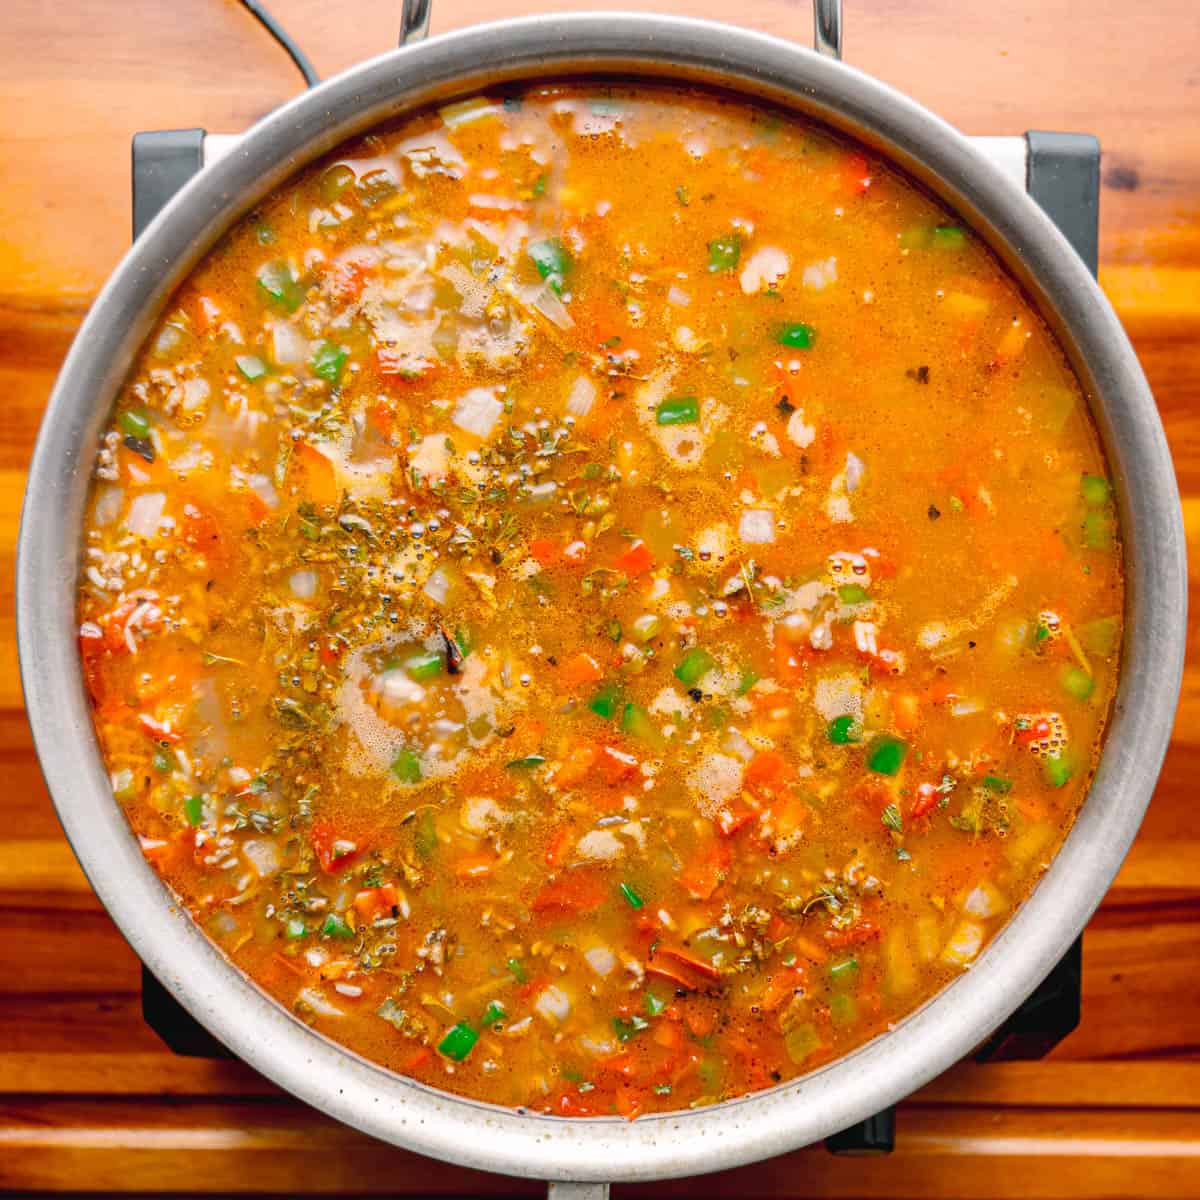 Pour in broth and bring to a boil over medium-high heat 